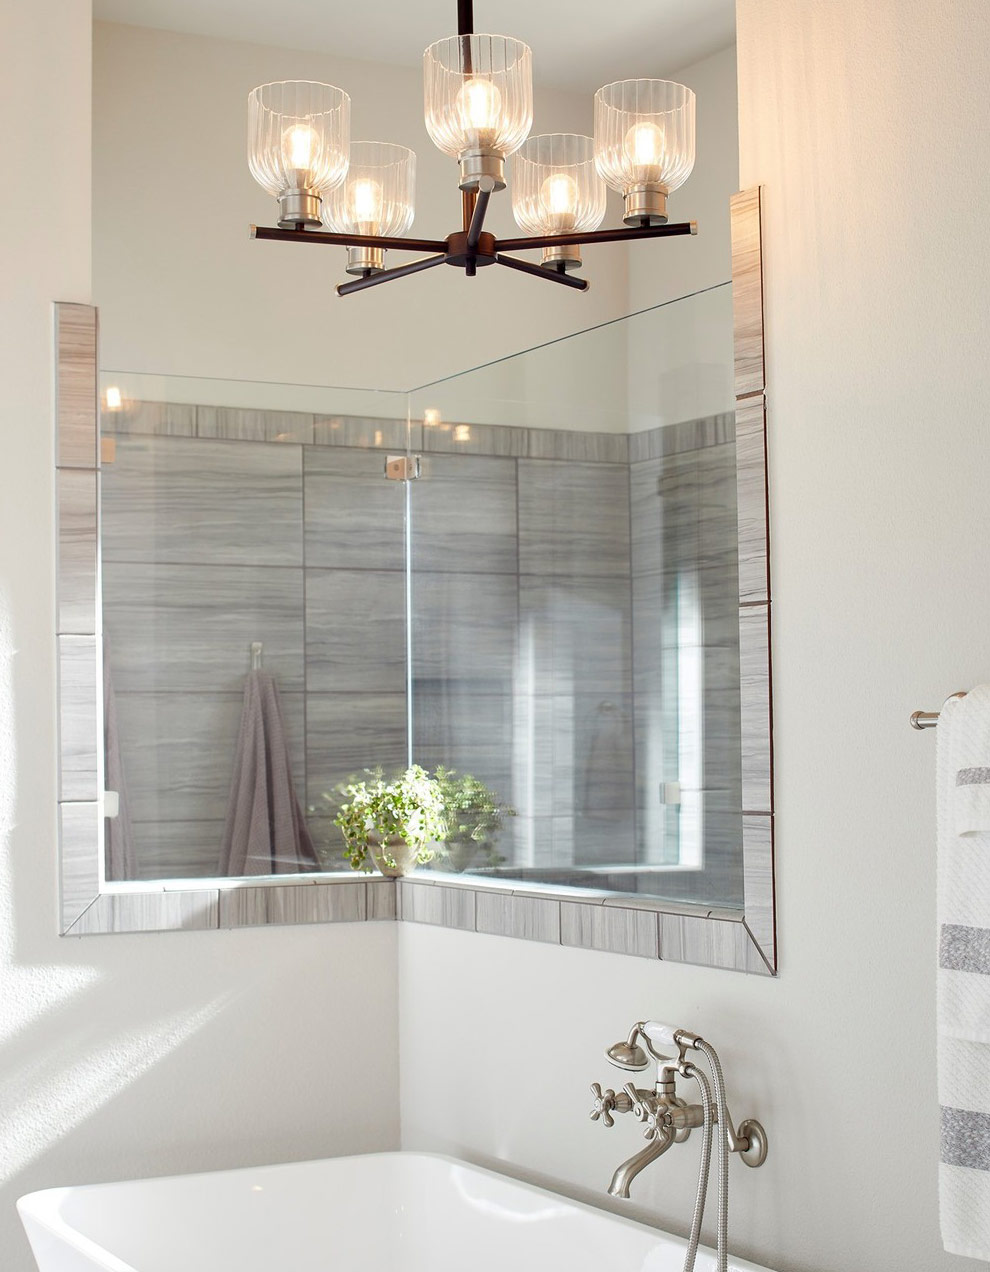 Bathroom with chandelier